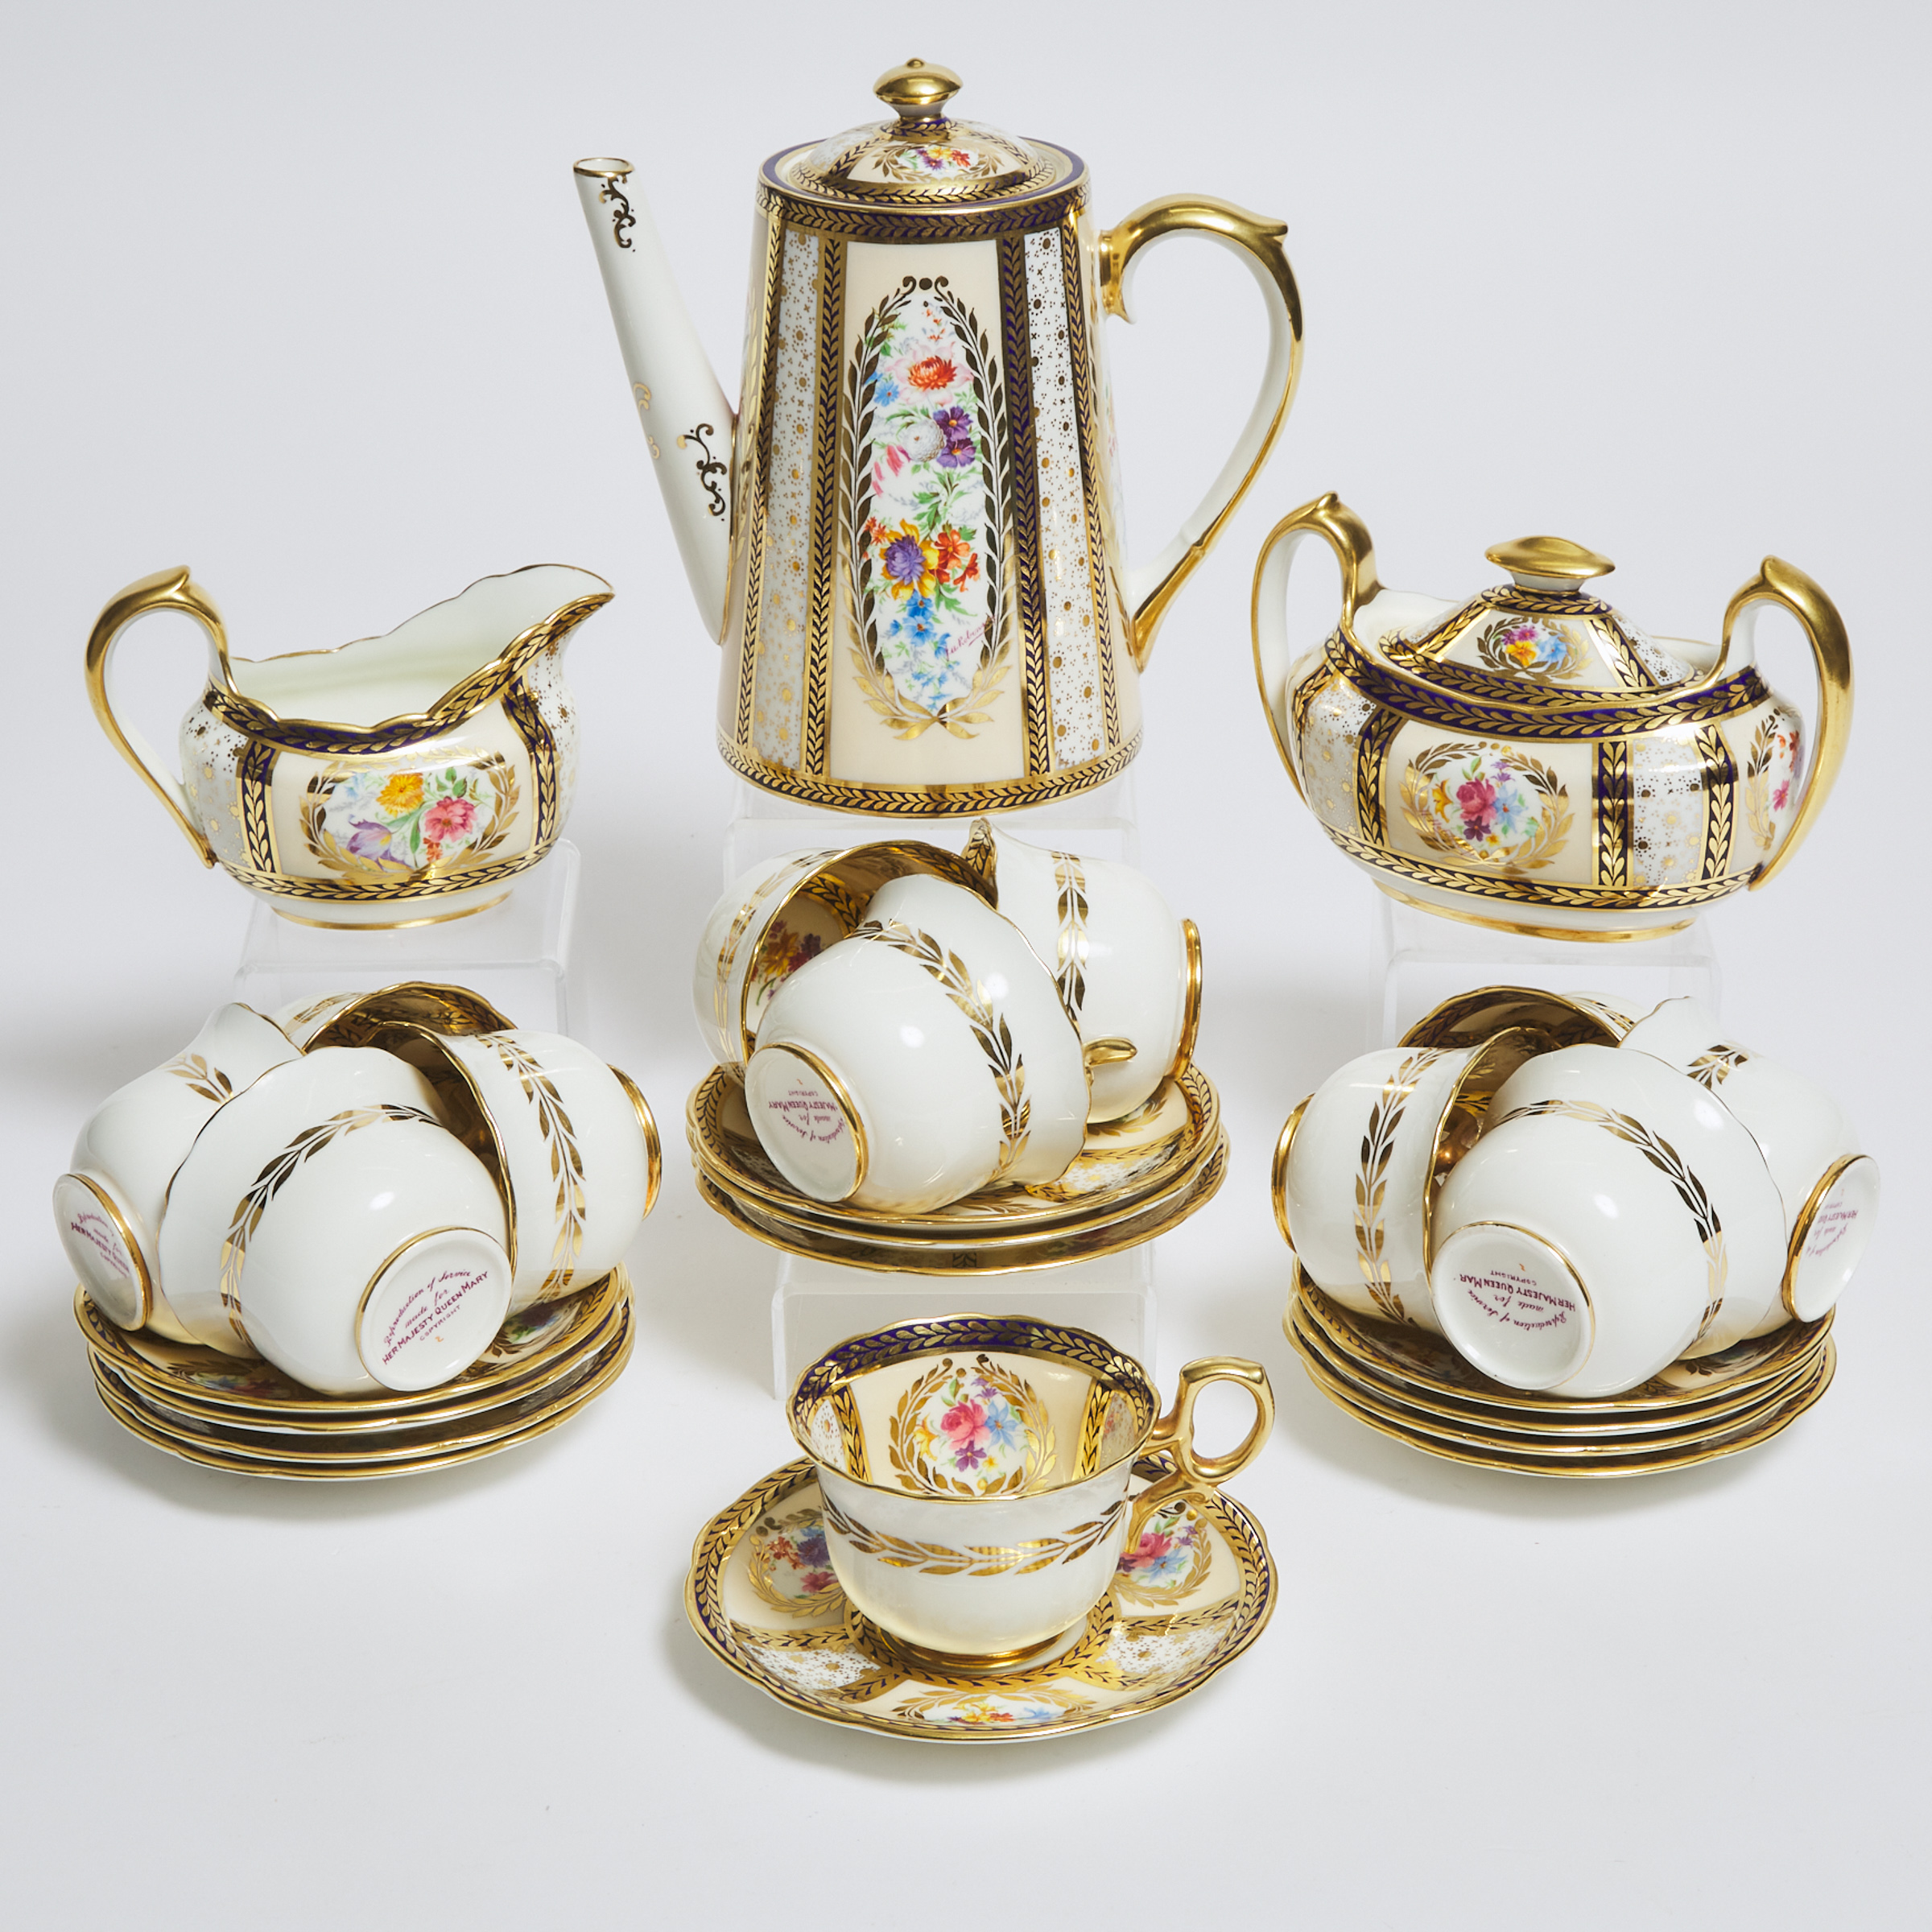 Royal Paragon 'Reproduction of Service made for Her Majesty Queen Mary' Coffee Service, 20th century